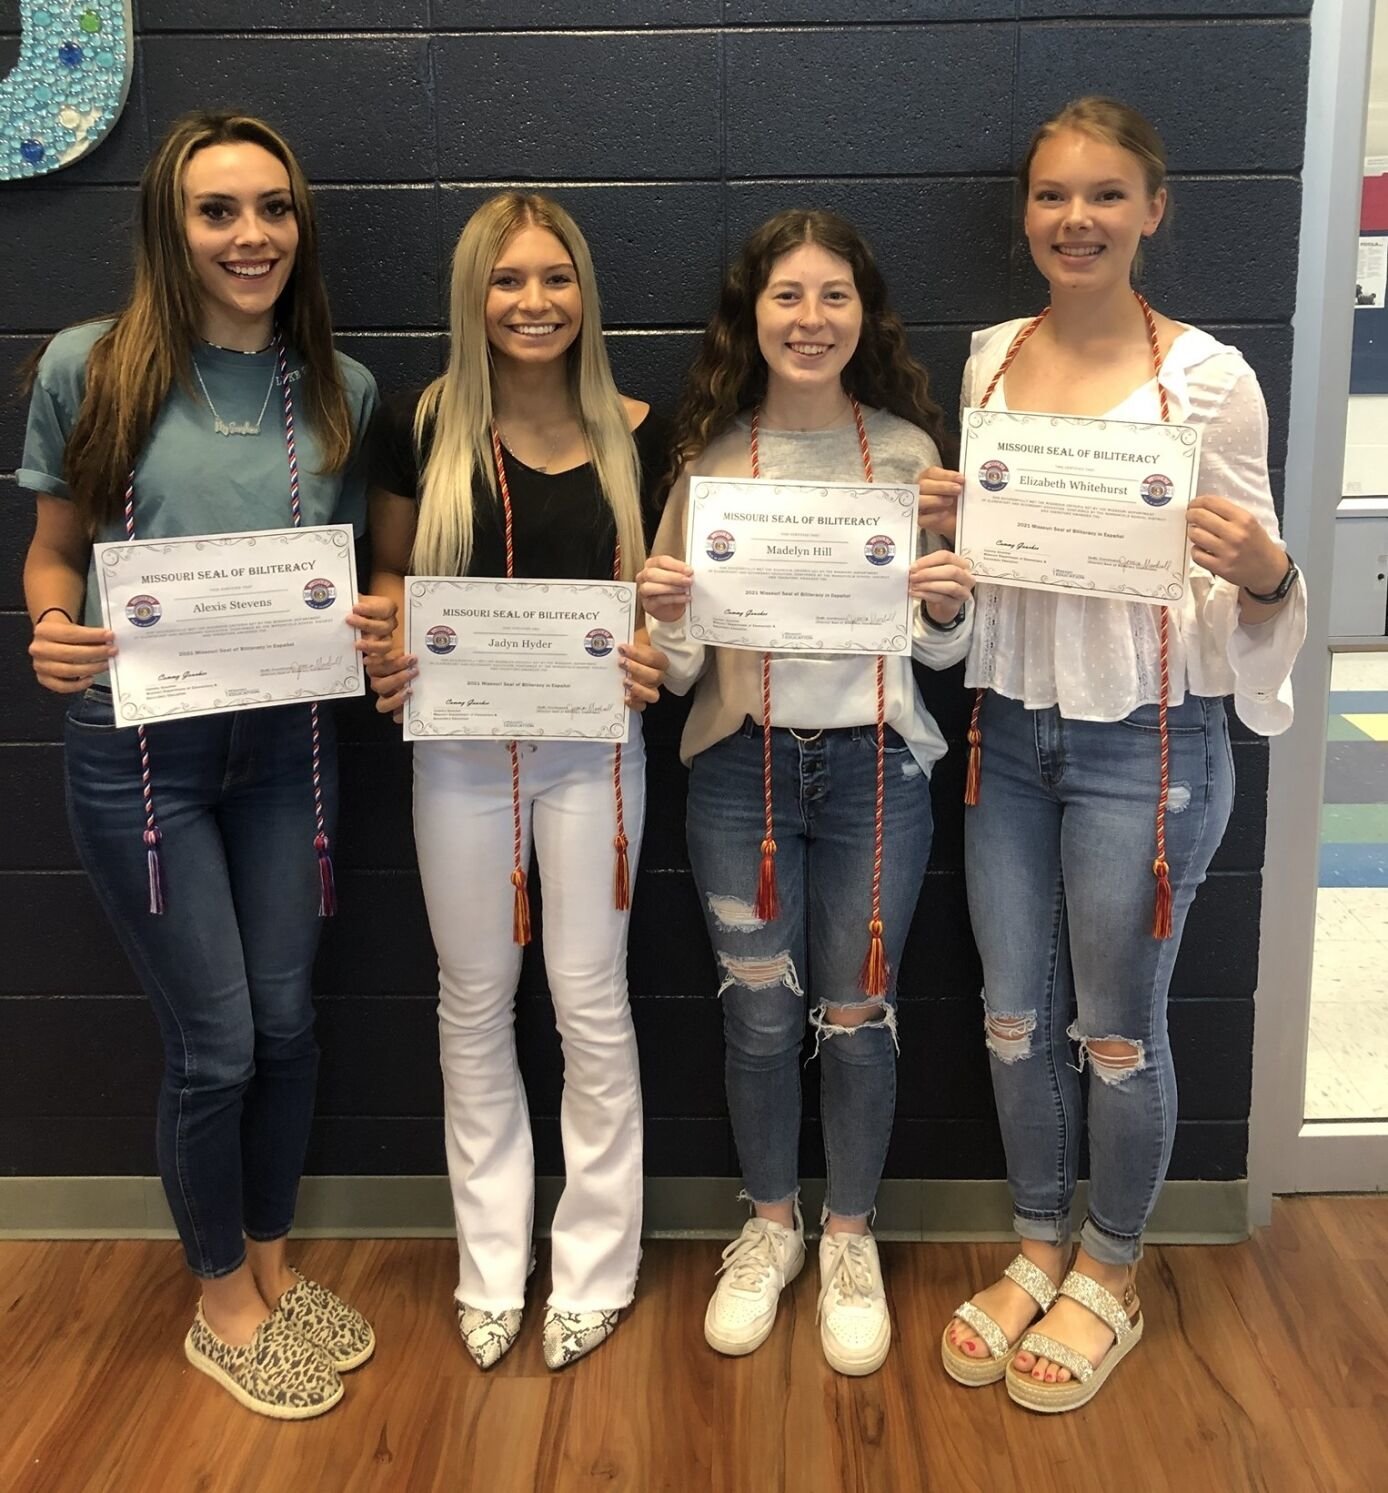 Pictured left to right: Alexis Stevens, Jadyn Hyder, Madelyn Hill and Betsy Whitehurst. These 2021 grads received awards for their scores on this years AAPPL exam.